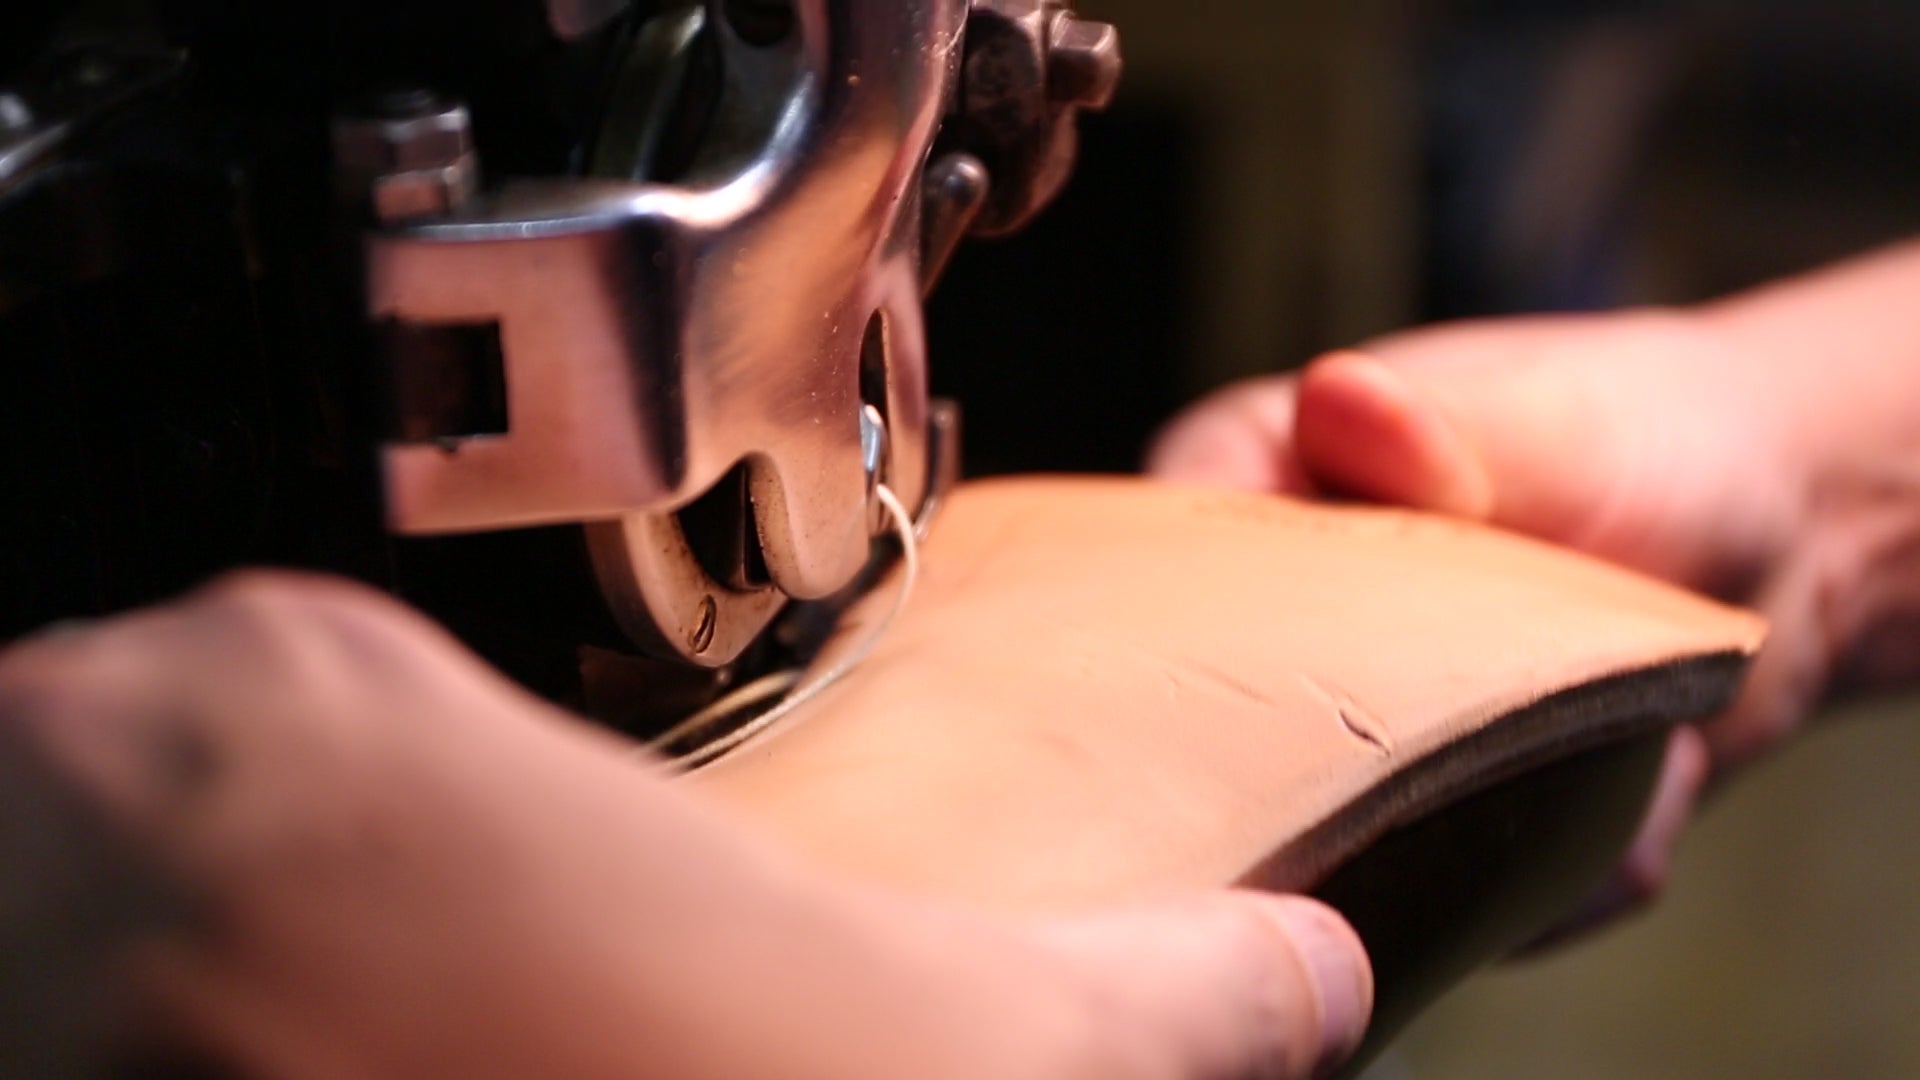 Load video: Sewing on a new Leather Sole